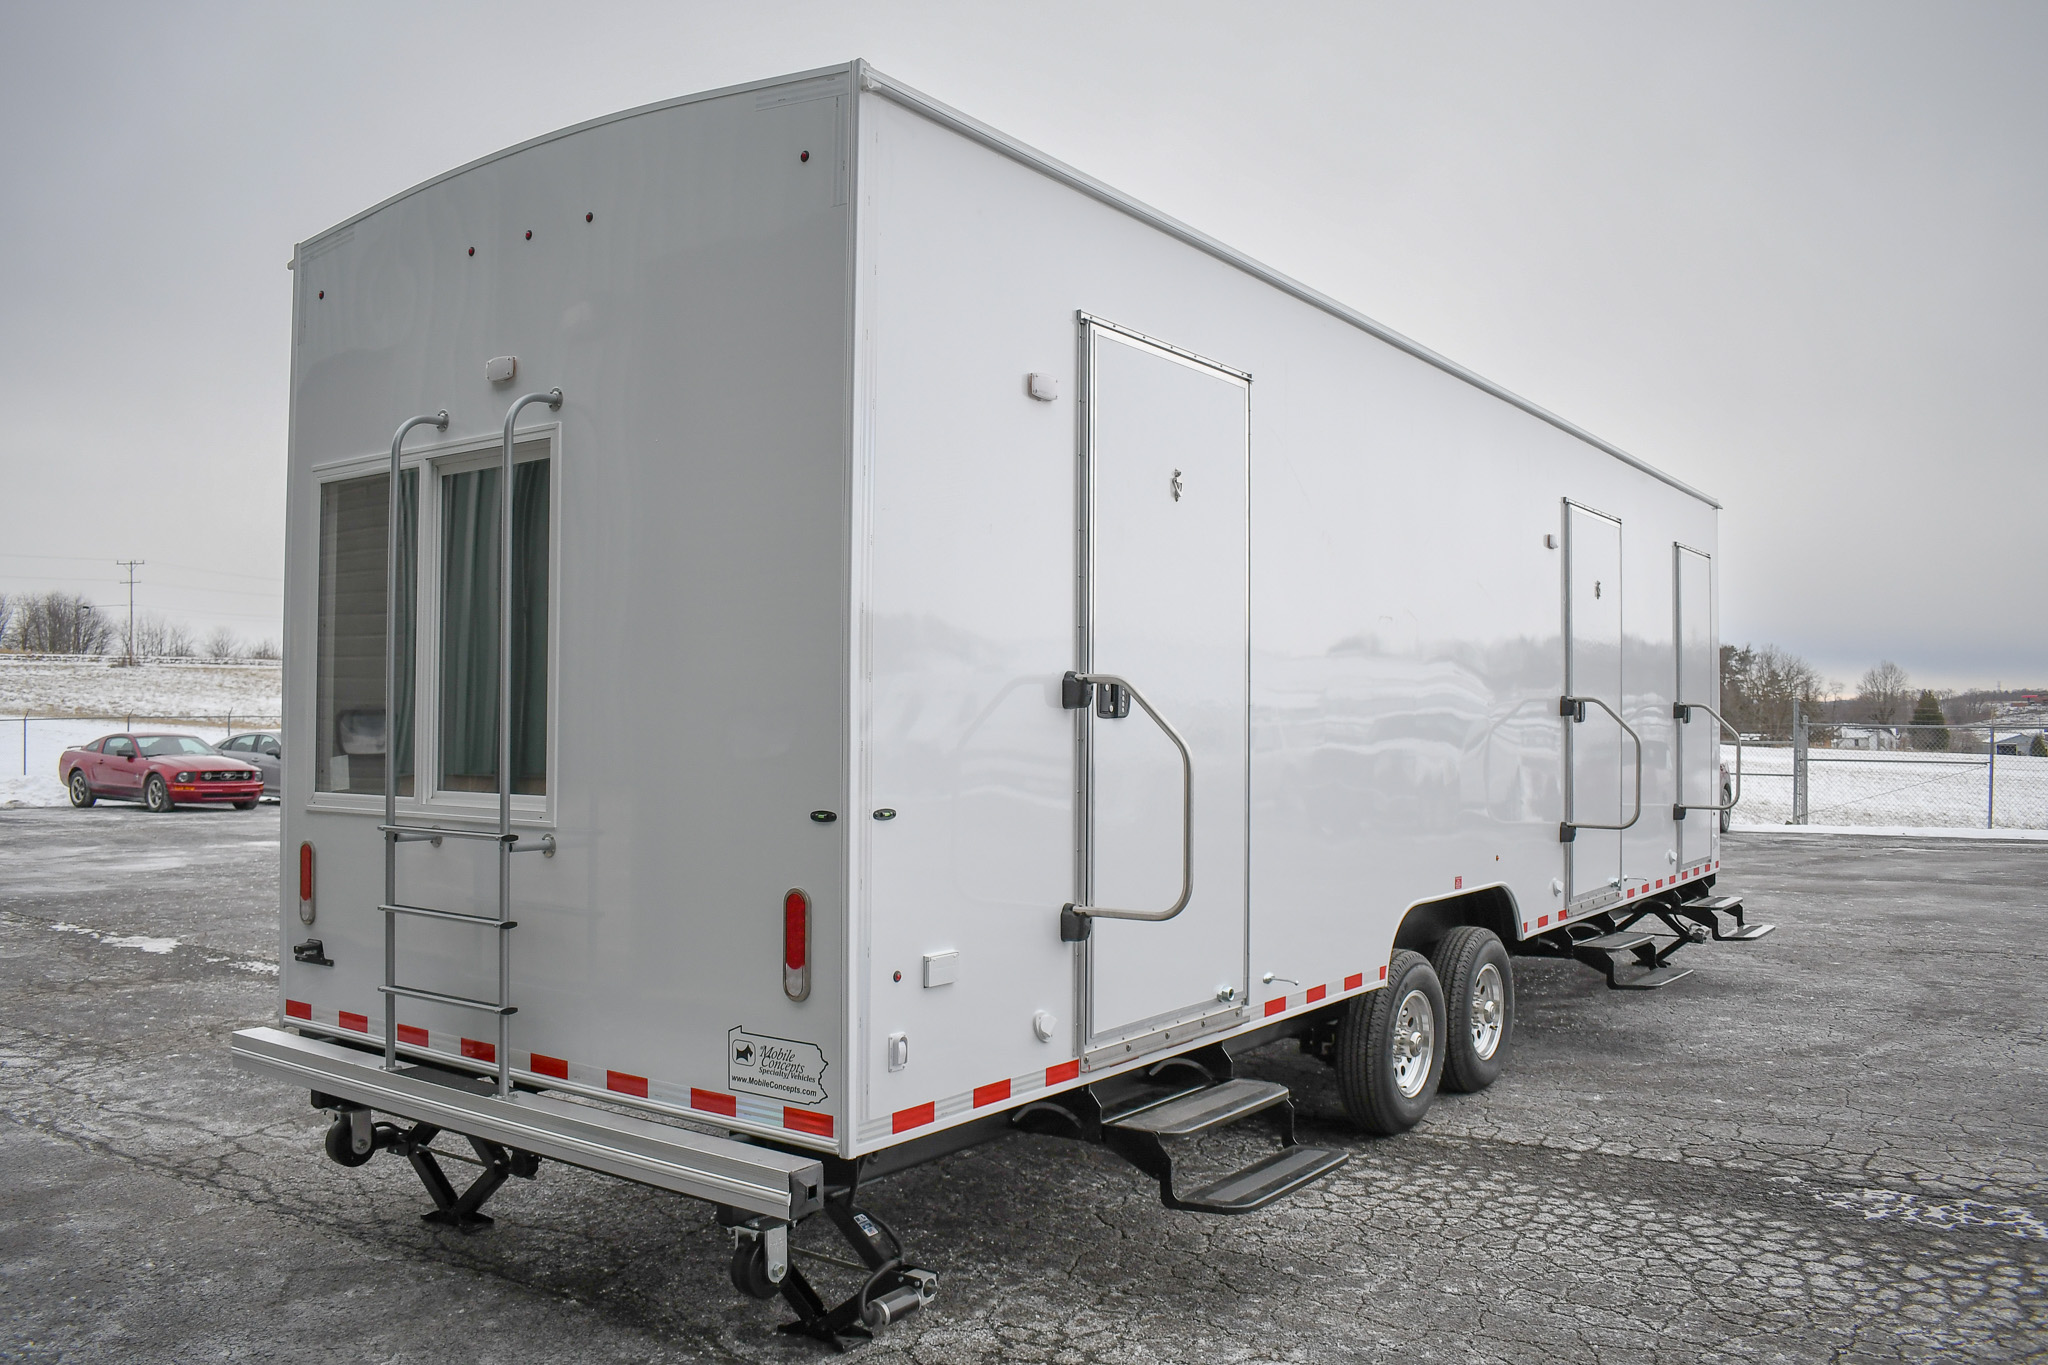 An exterior view of the unit for Merrillville, IN.